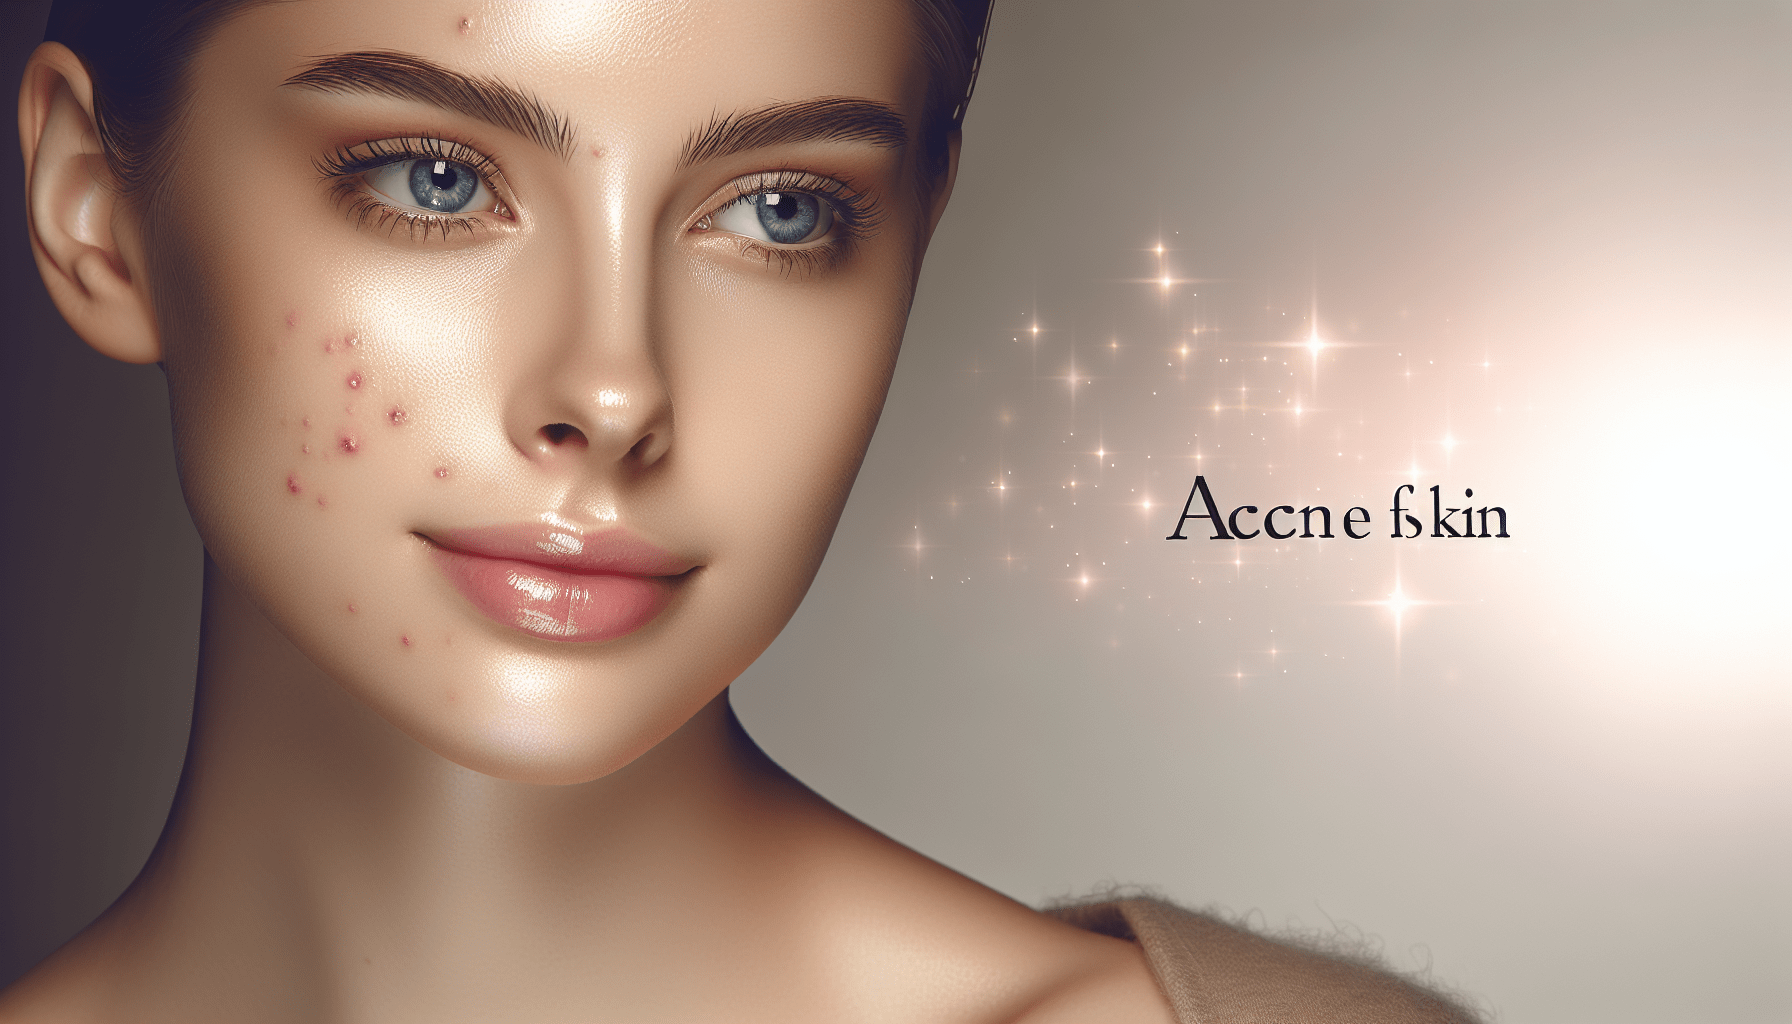 Is There A Way To Never Get Acne?